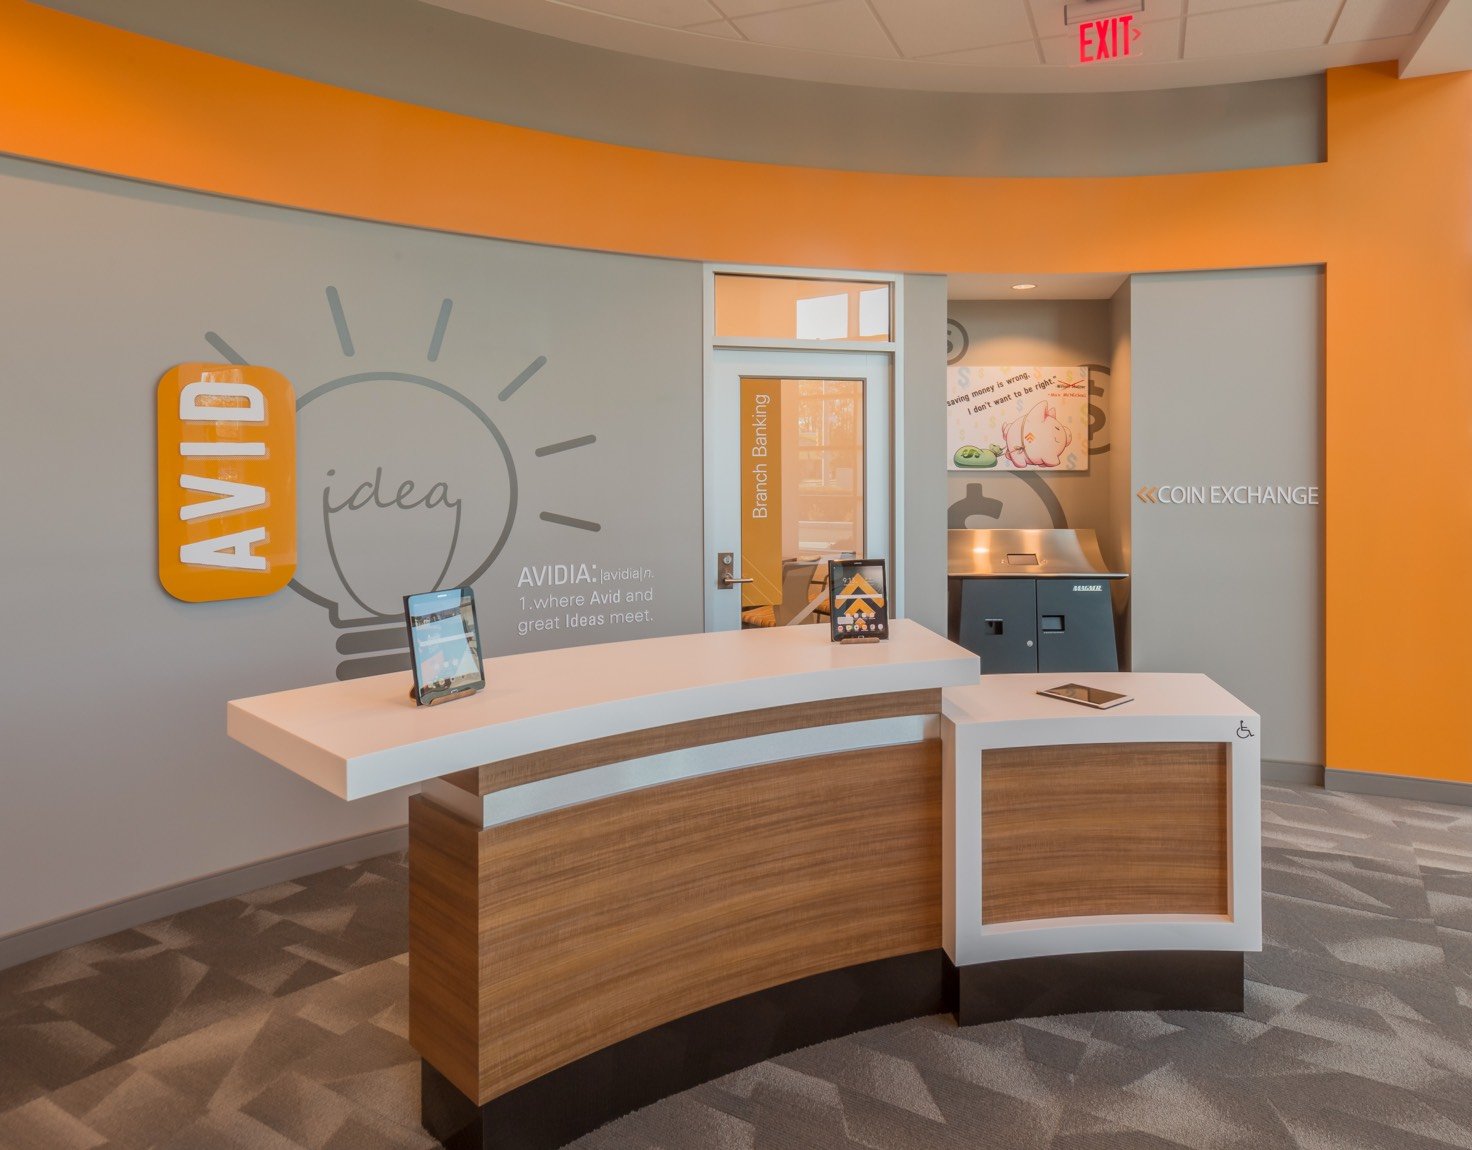 An orange and grey bank counter with an idea lightbulb detailed on the wall.